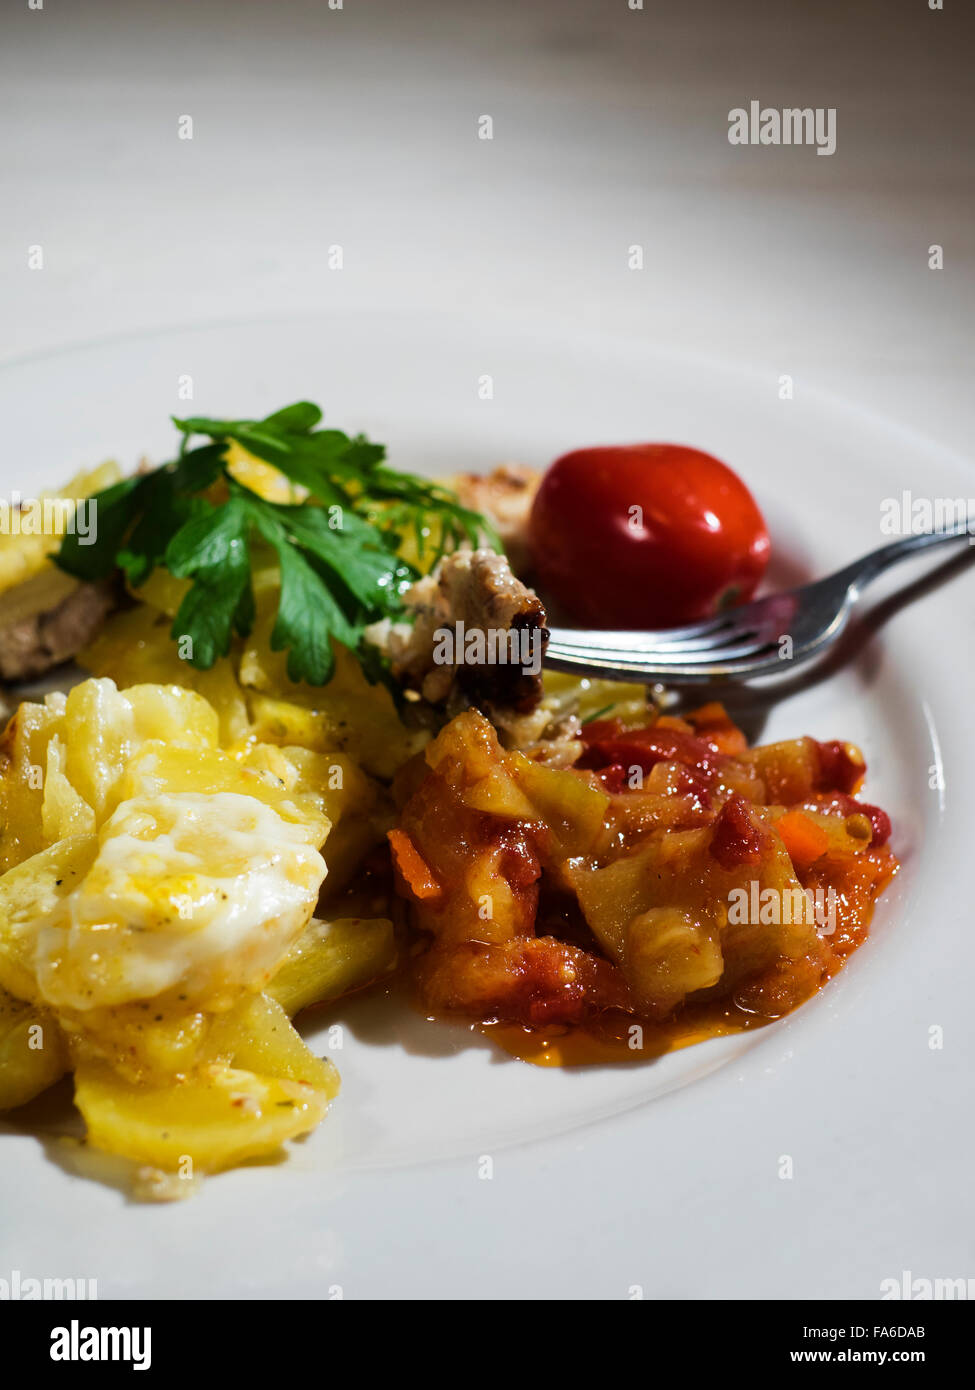 Plate of meat stew with potatoes and cheese Stock Photo